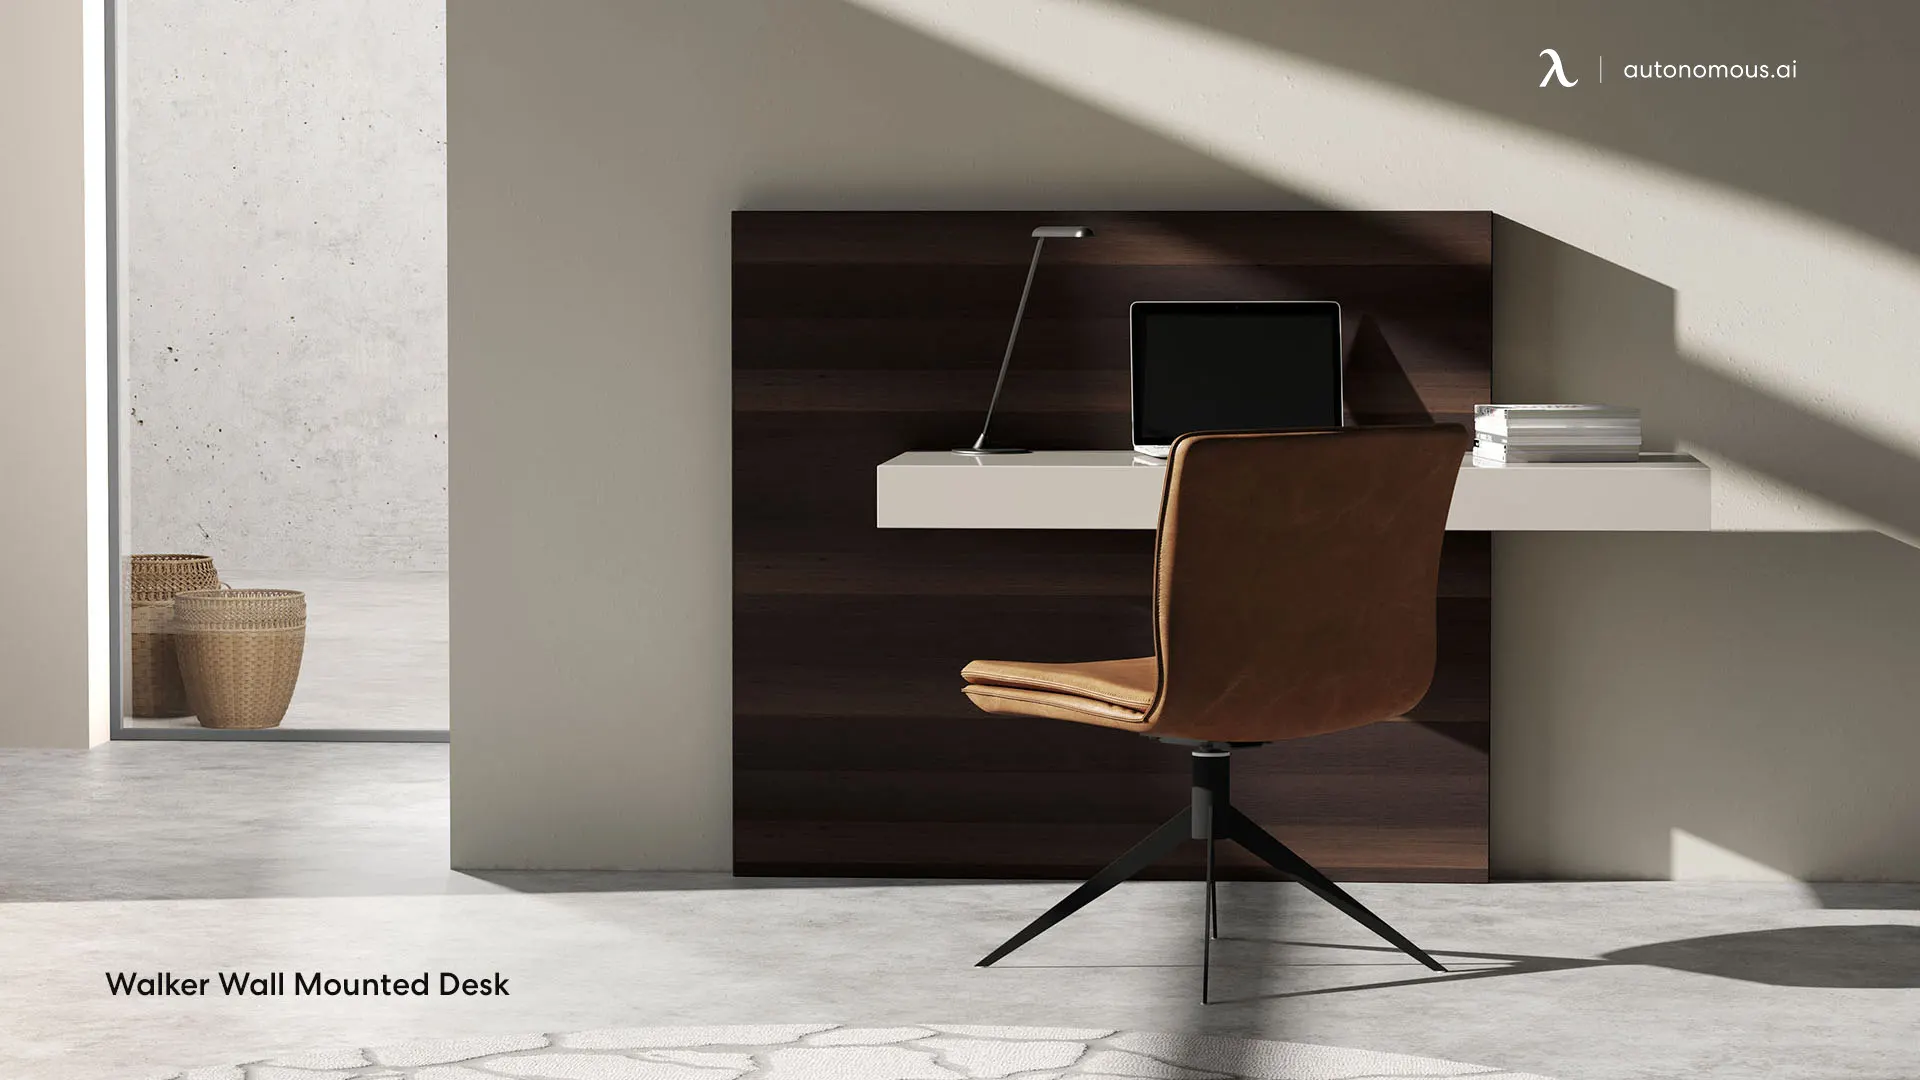 Keep It Simple and Bright With a Wall-mounted Desk